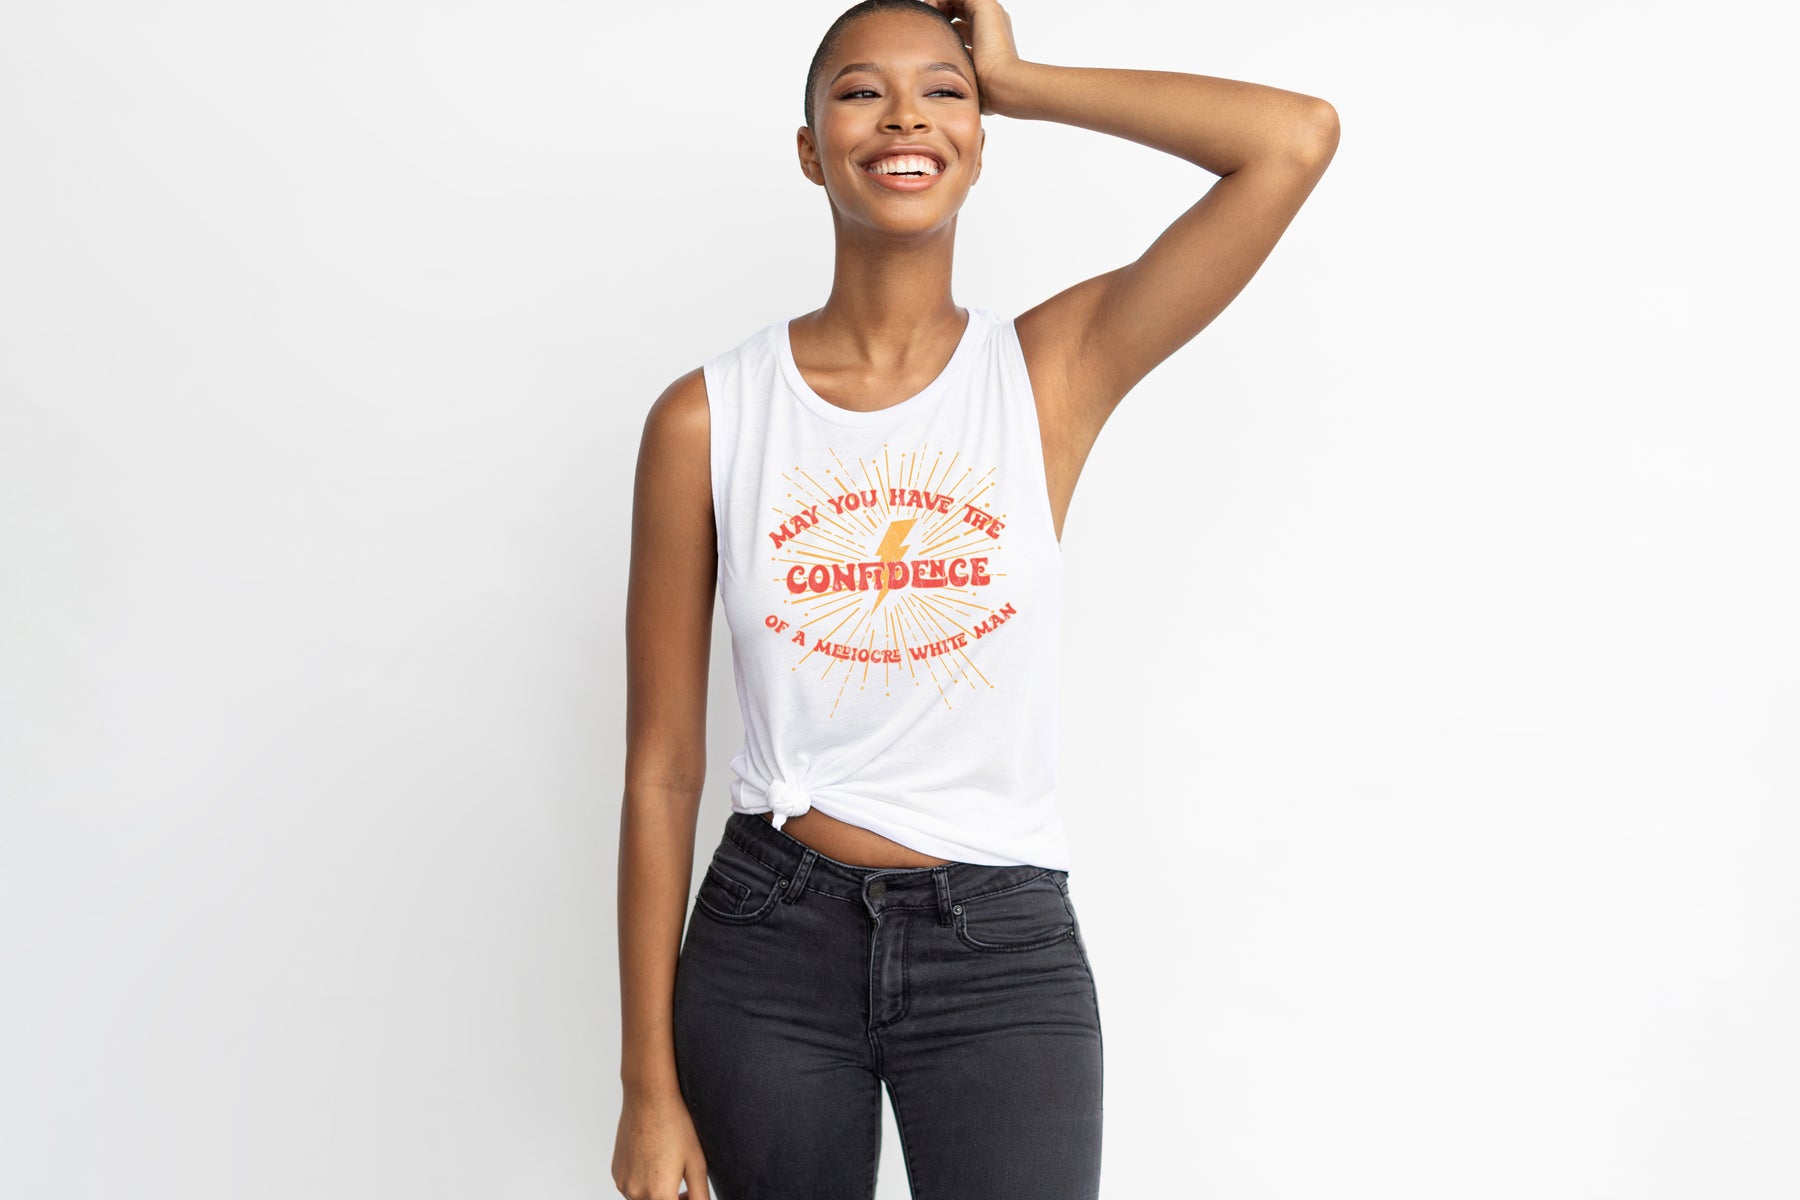 May You Have the Confidence of a Mediocre White Man Women's Muscle Tank